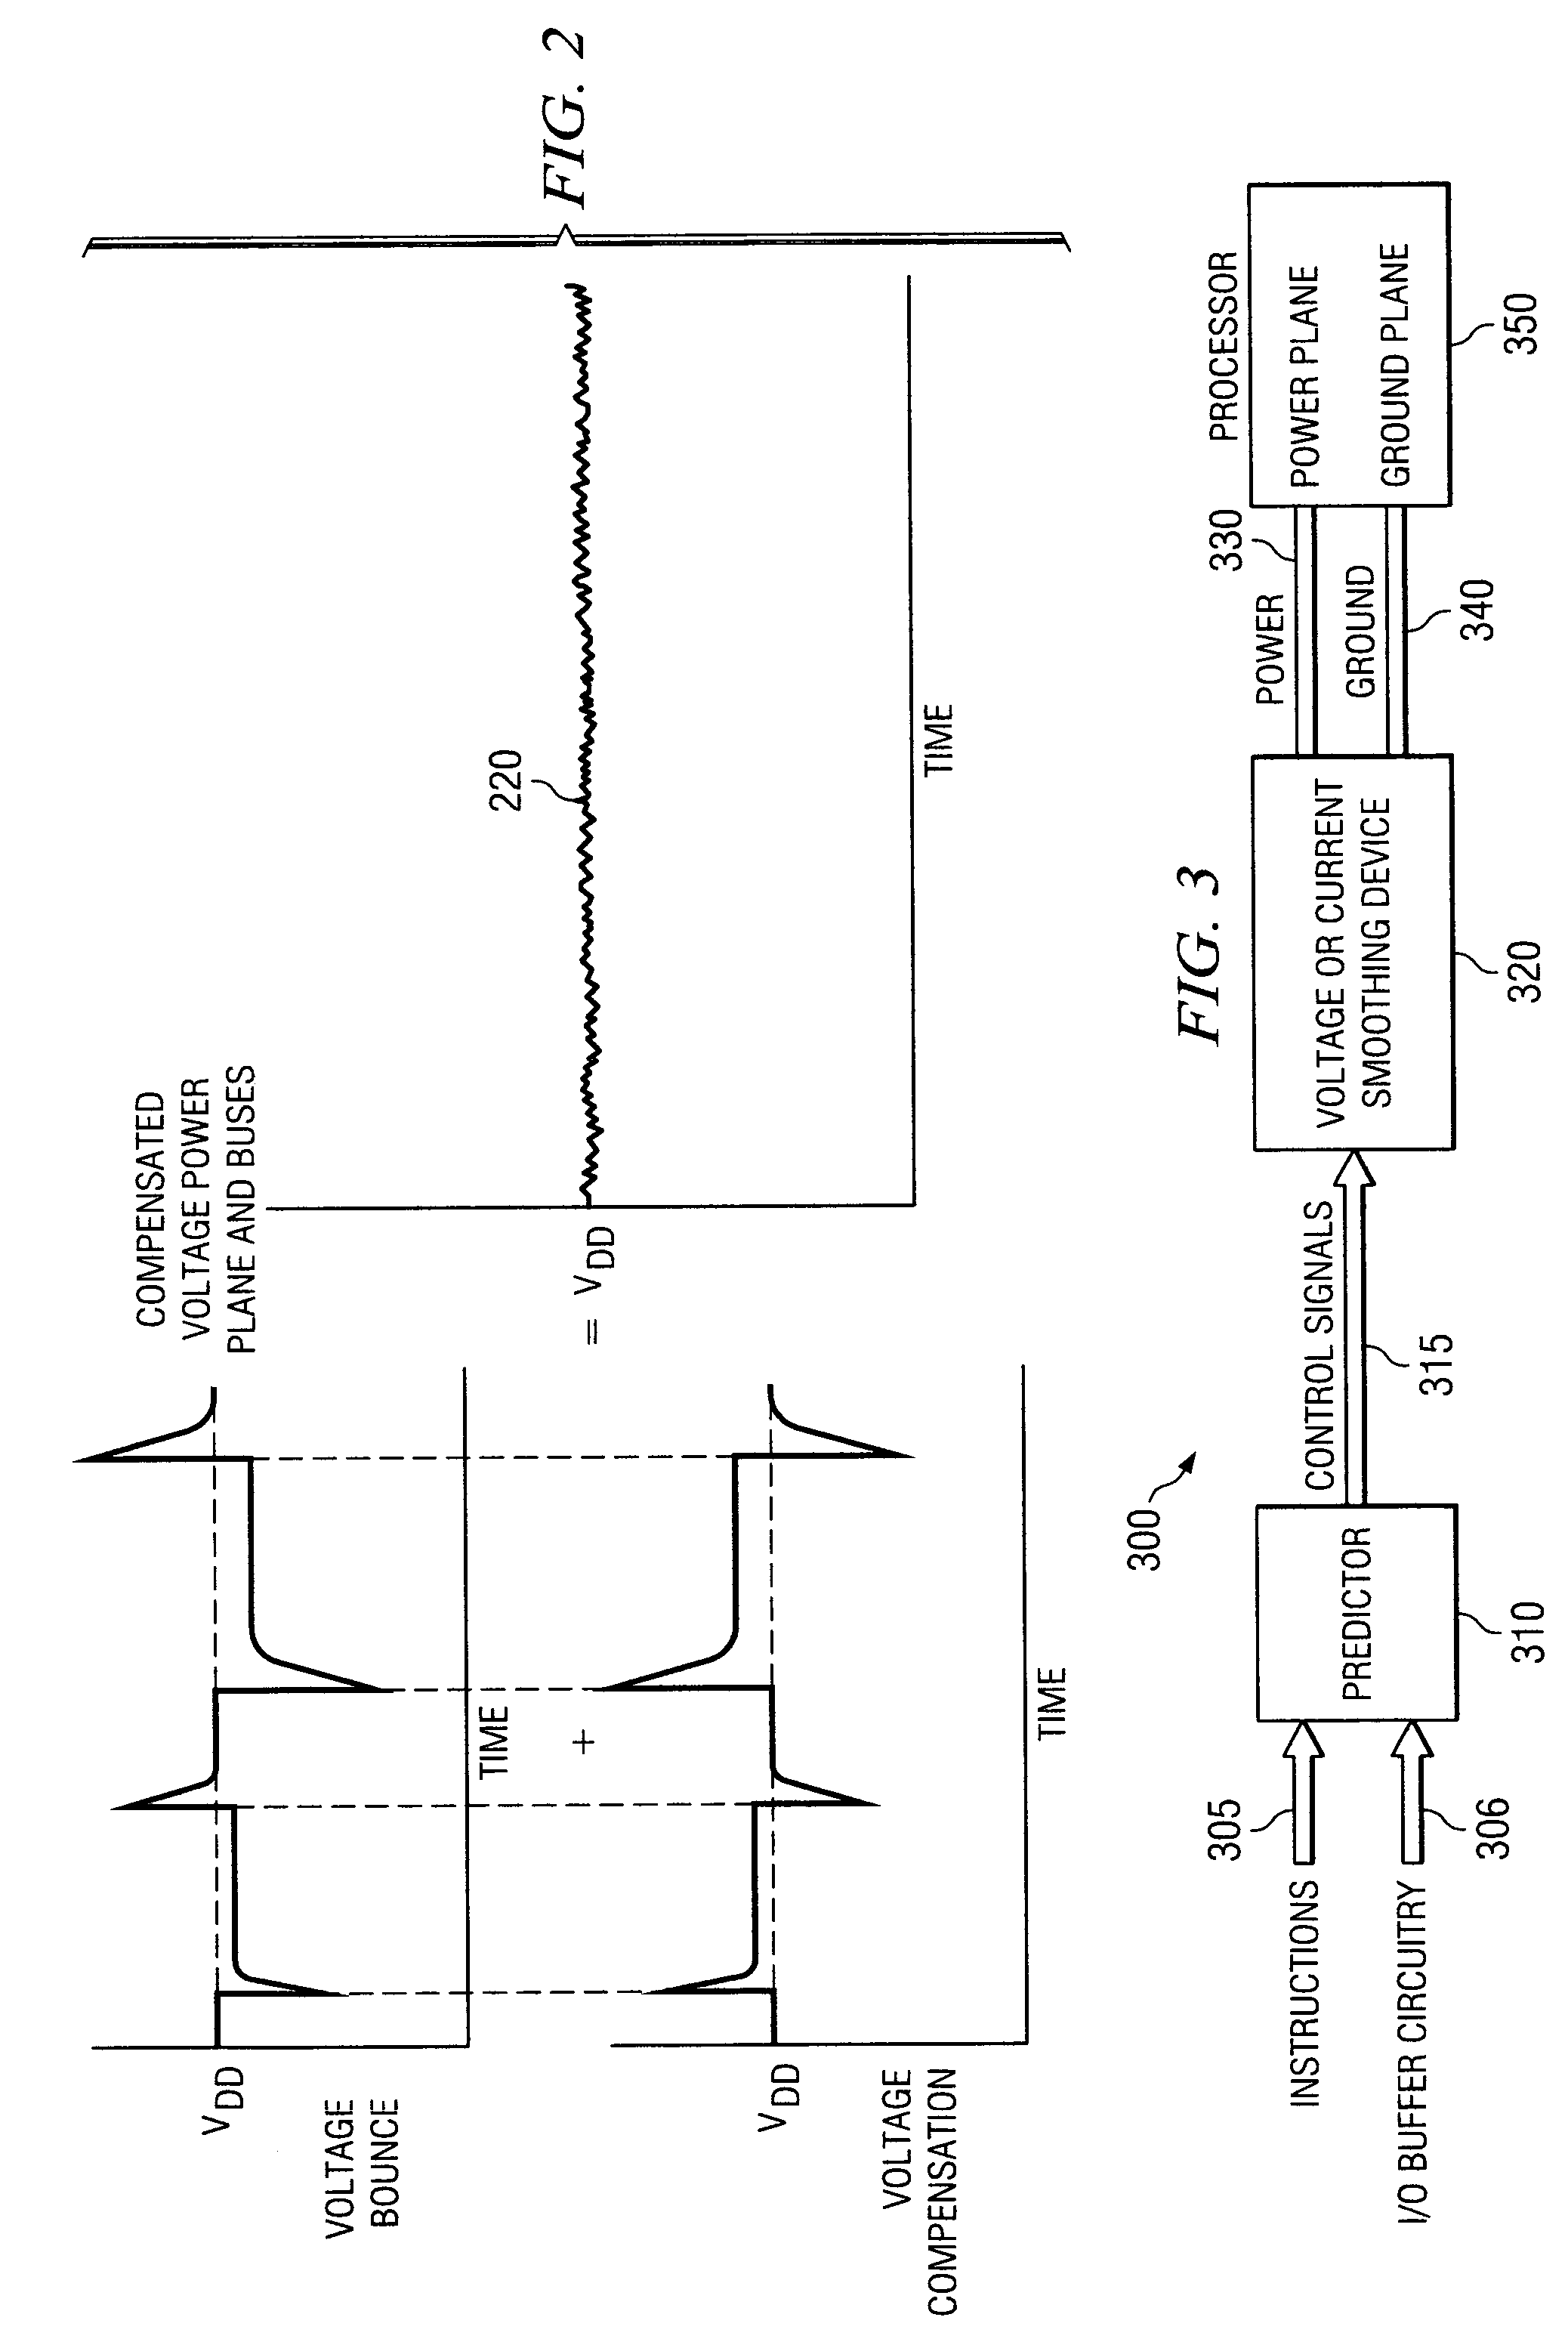 Method and apparatus to minimize power and ground bounce in a logic device